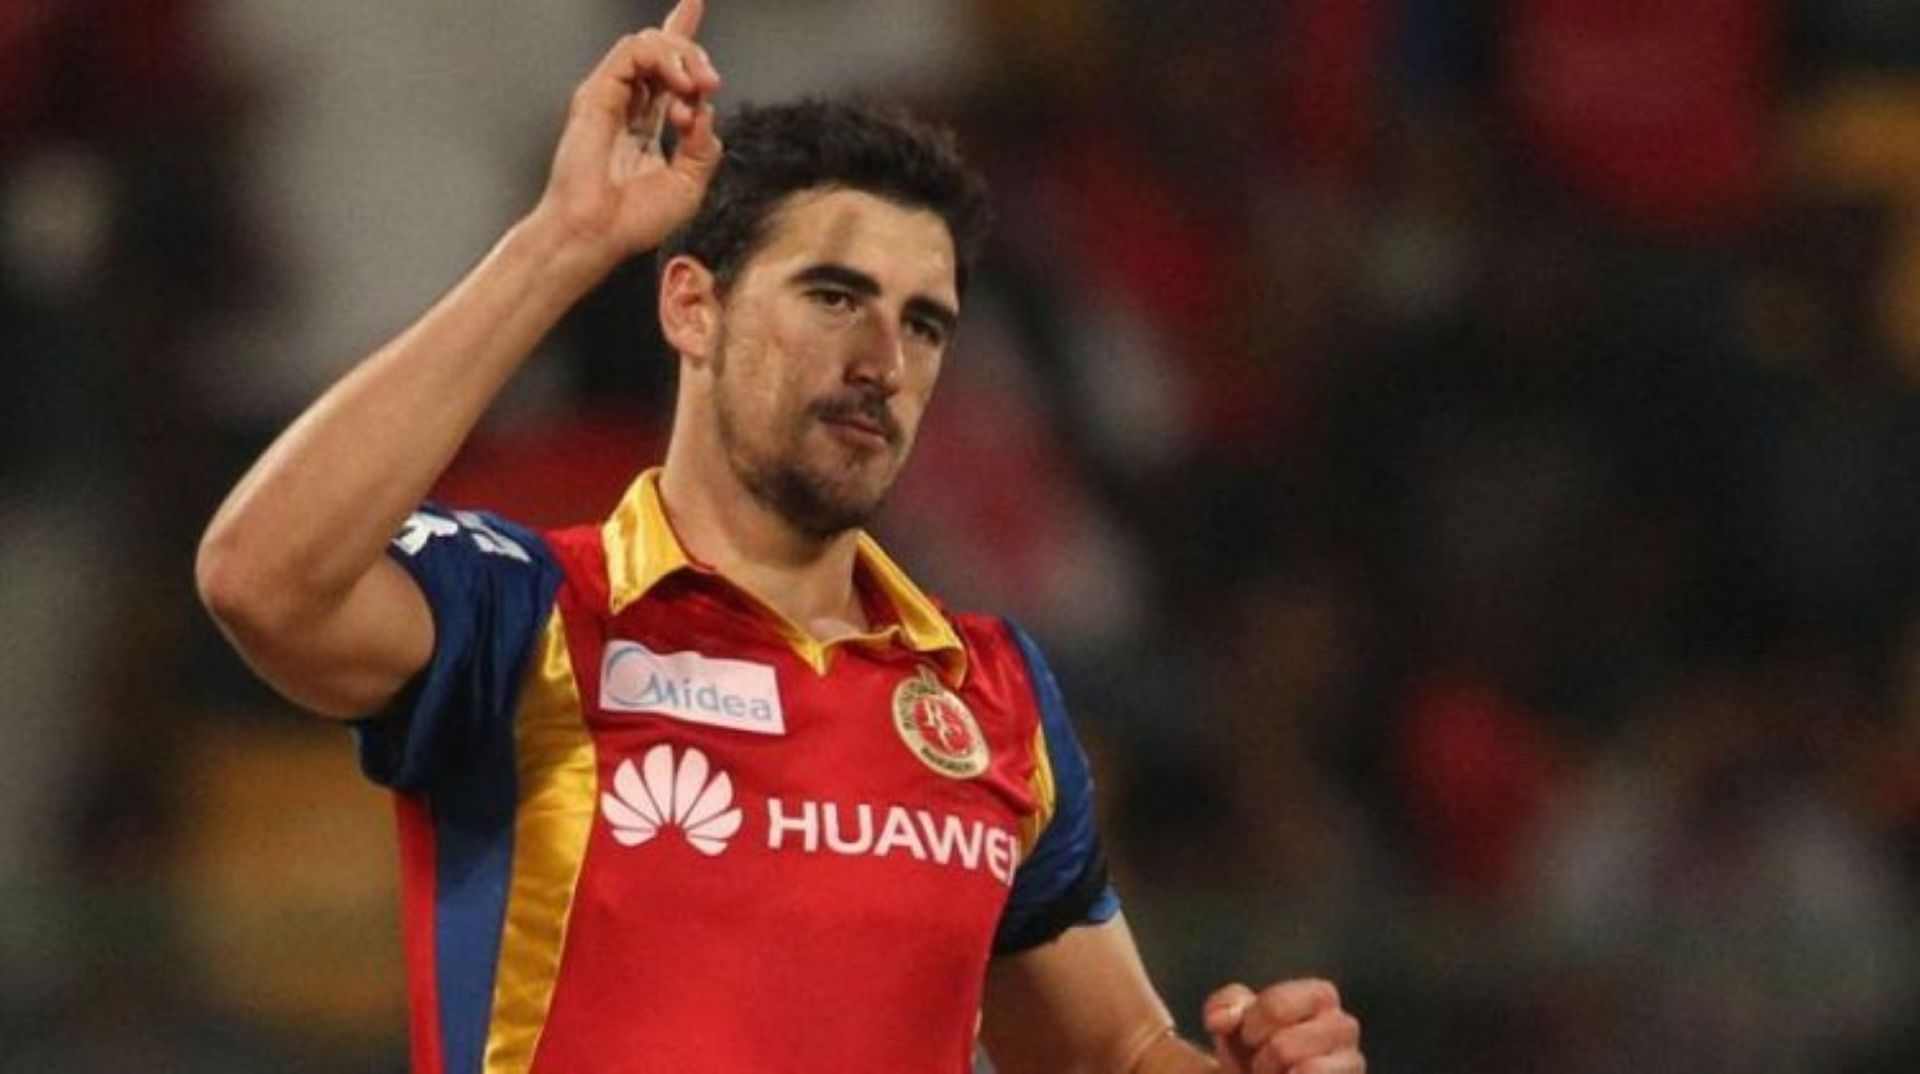 Mitchell Starc has not played in the IPL since his stints with RCB in 2014 and 2016